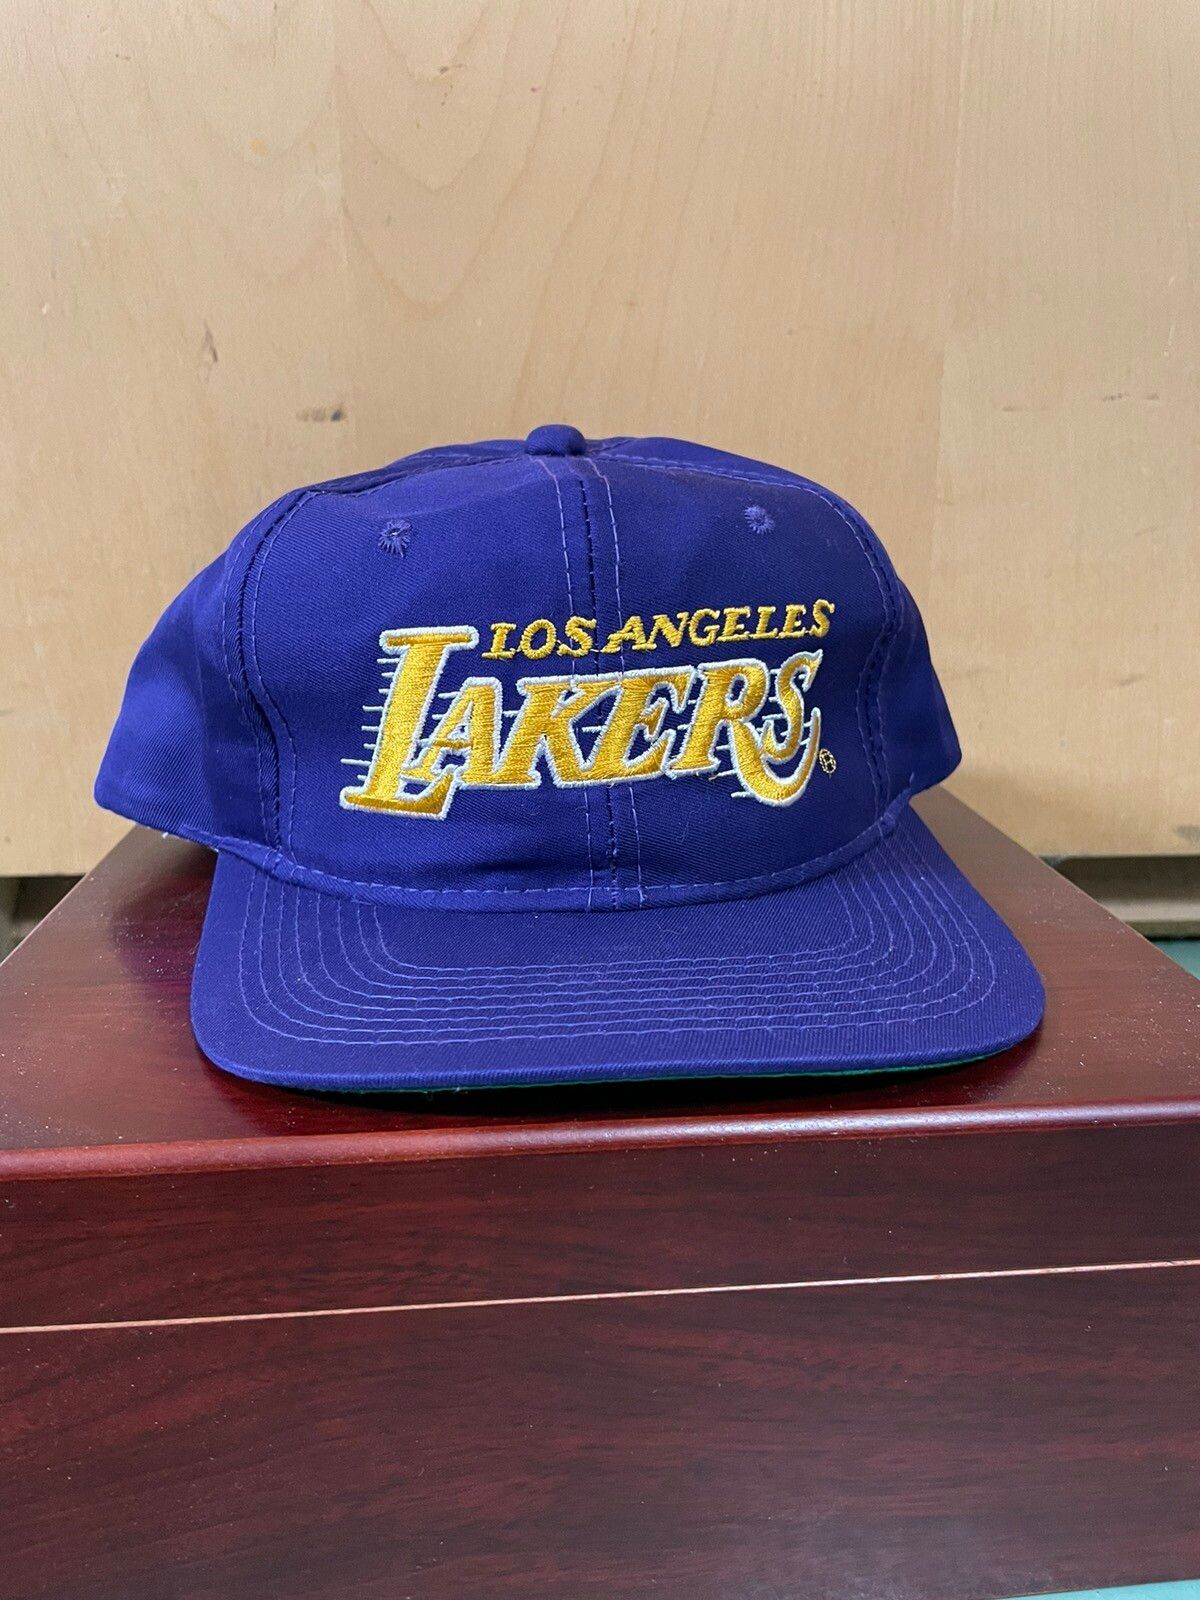 Lakers Sports Specialties Snapback | Grailed